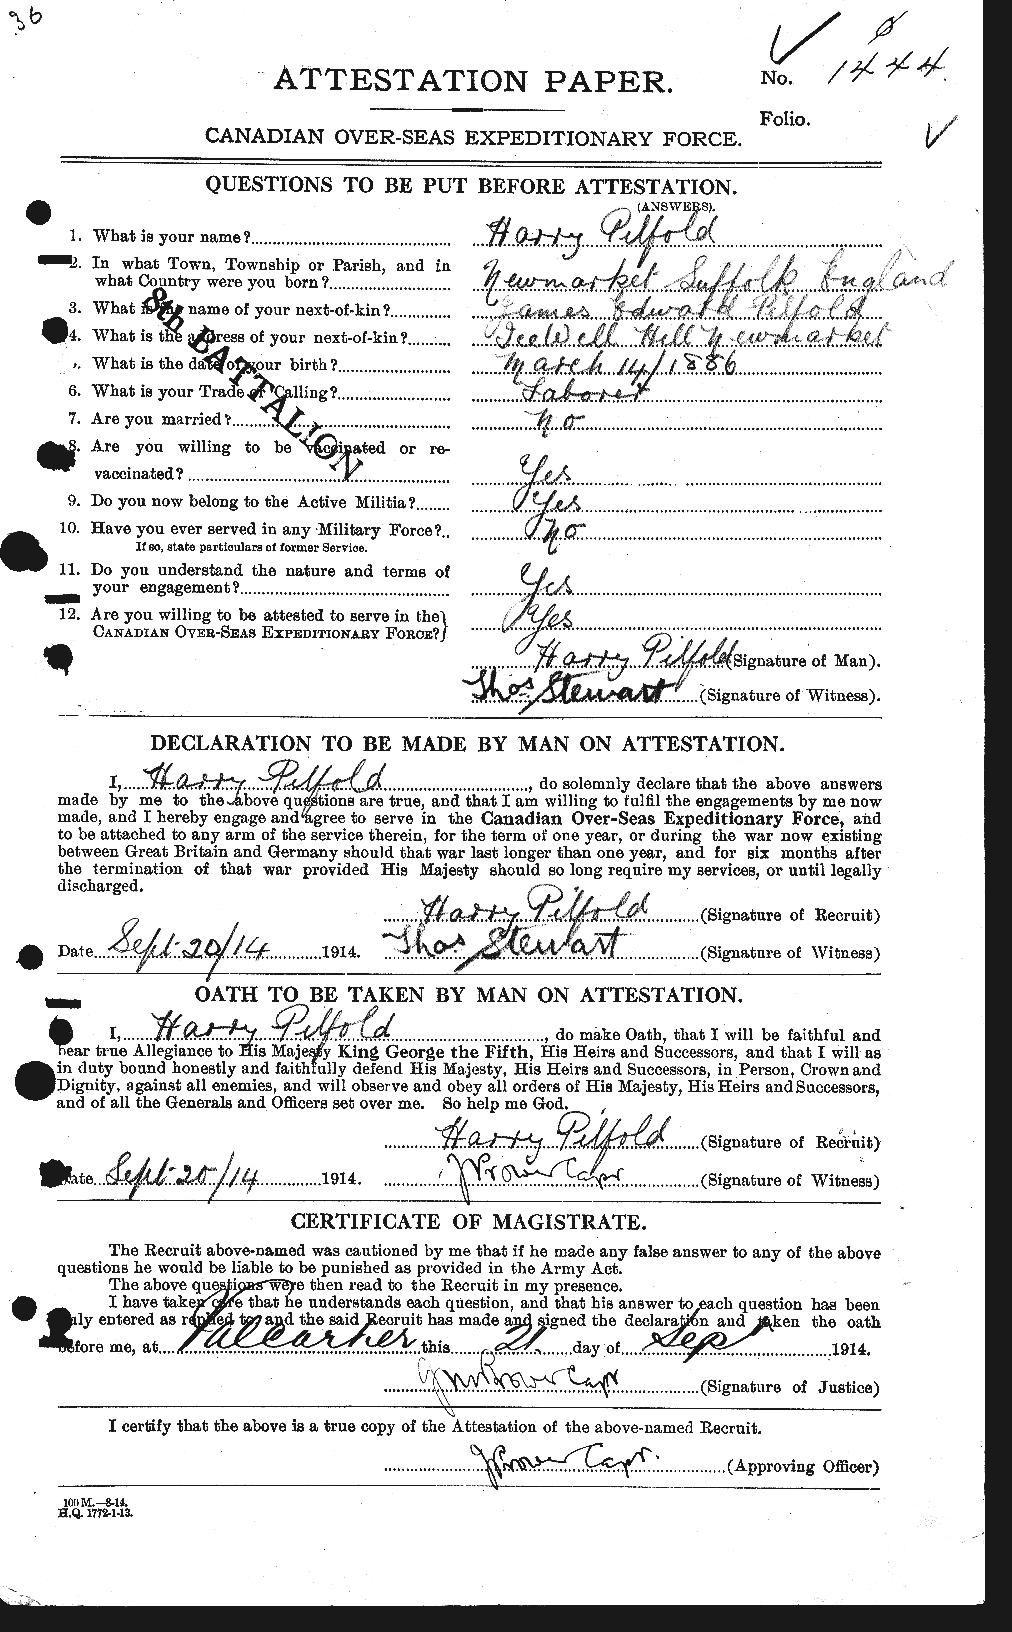 Personnel Records of the First World War - CEF 582280a